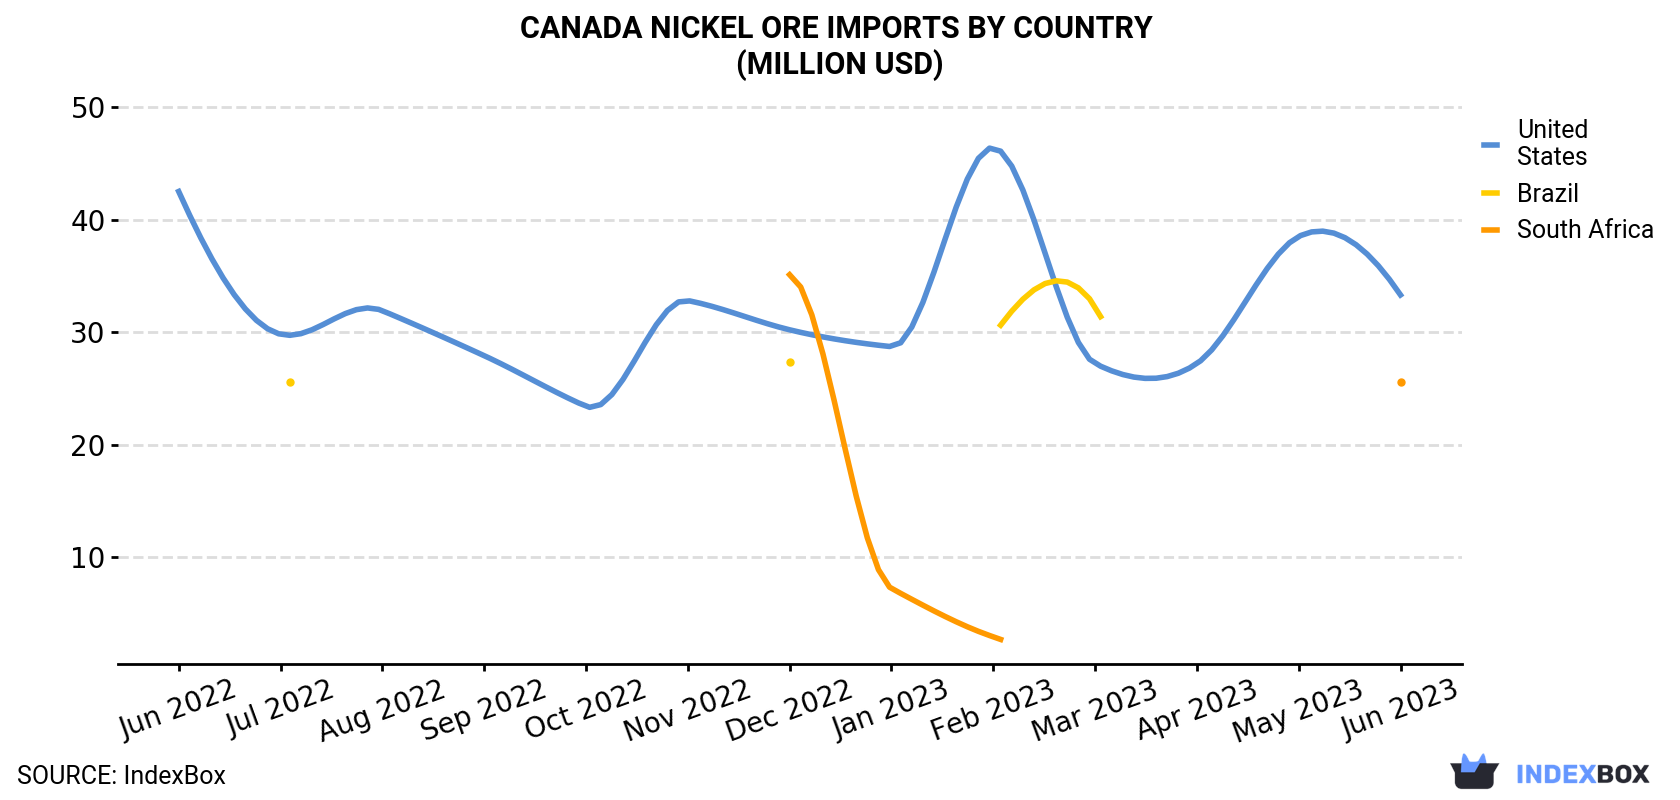 Canada Nickel Ore Imports By Country (Million USD)